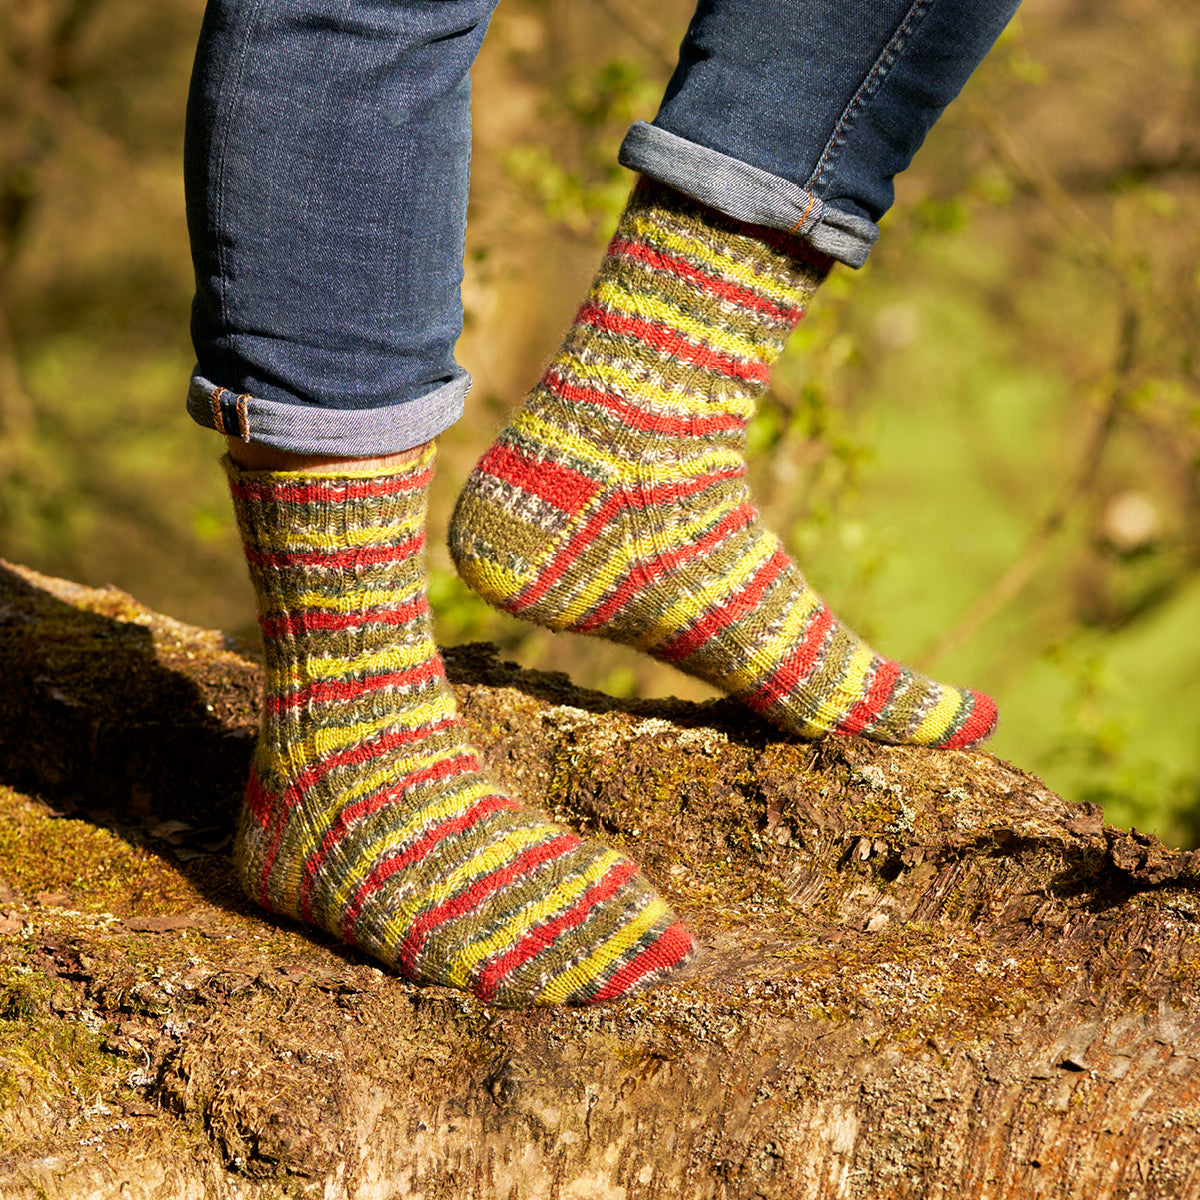 WYS Along The River Bank Sock Pattern Book